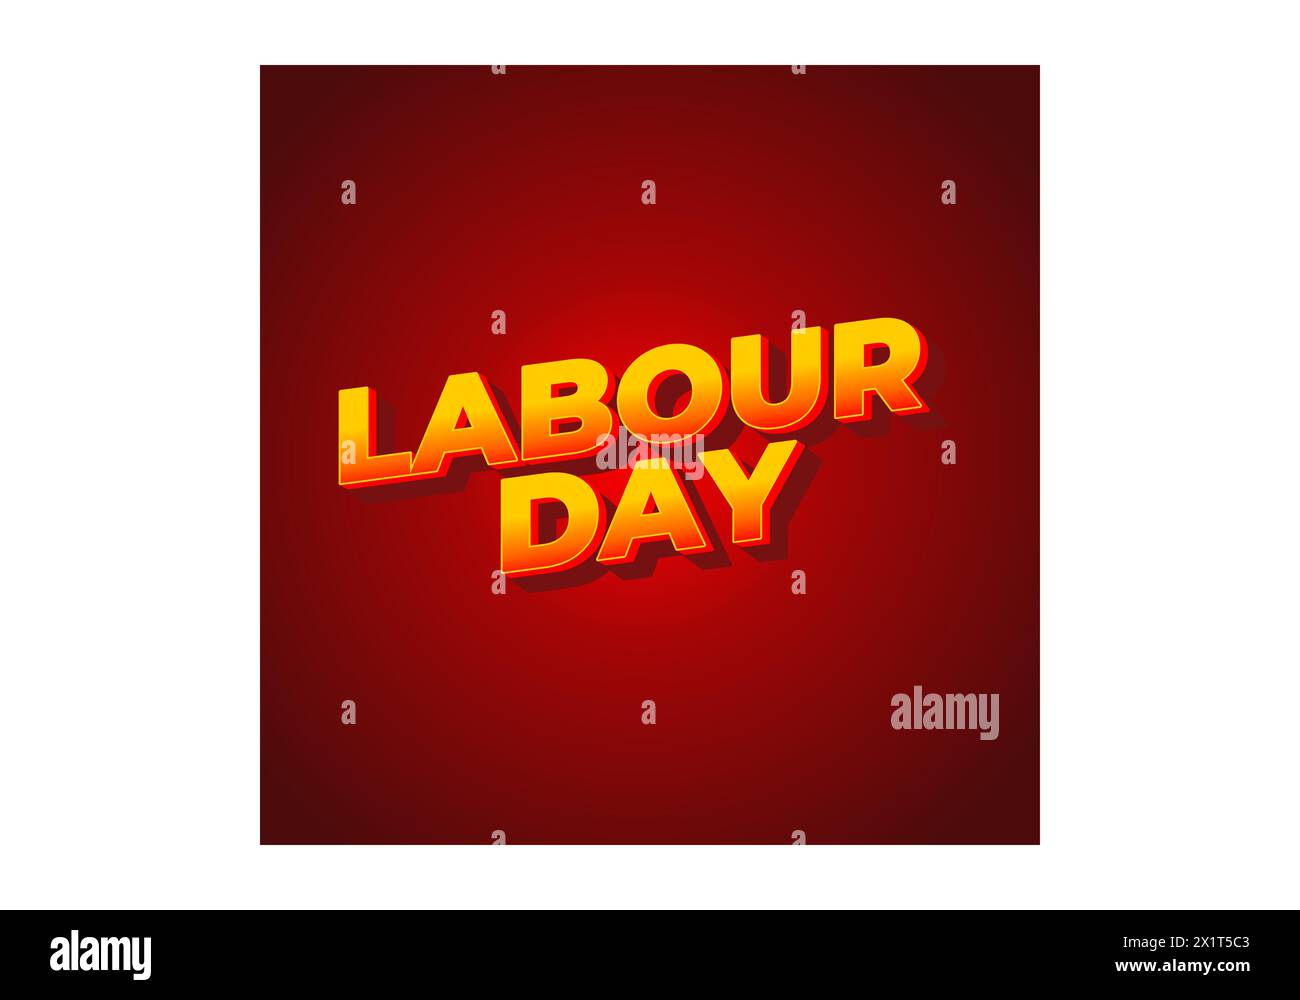 Labour day. Text effect design in eye catching colors and 3D look Stock Vector